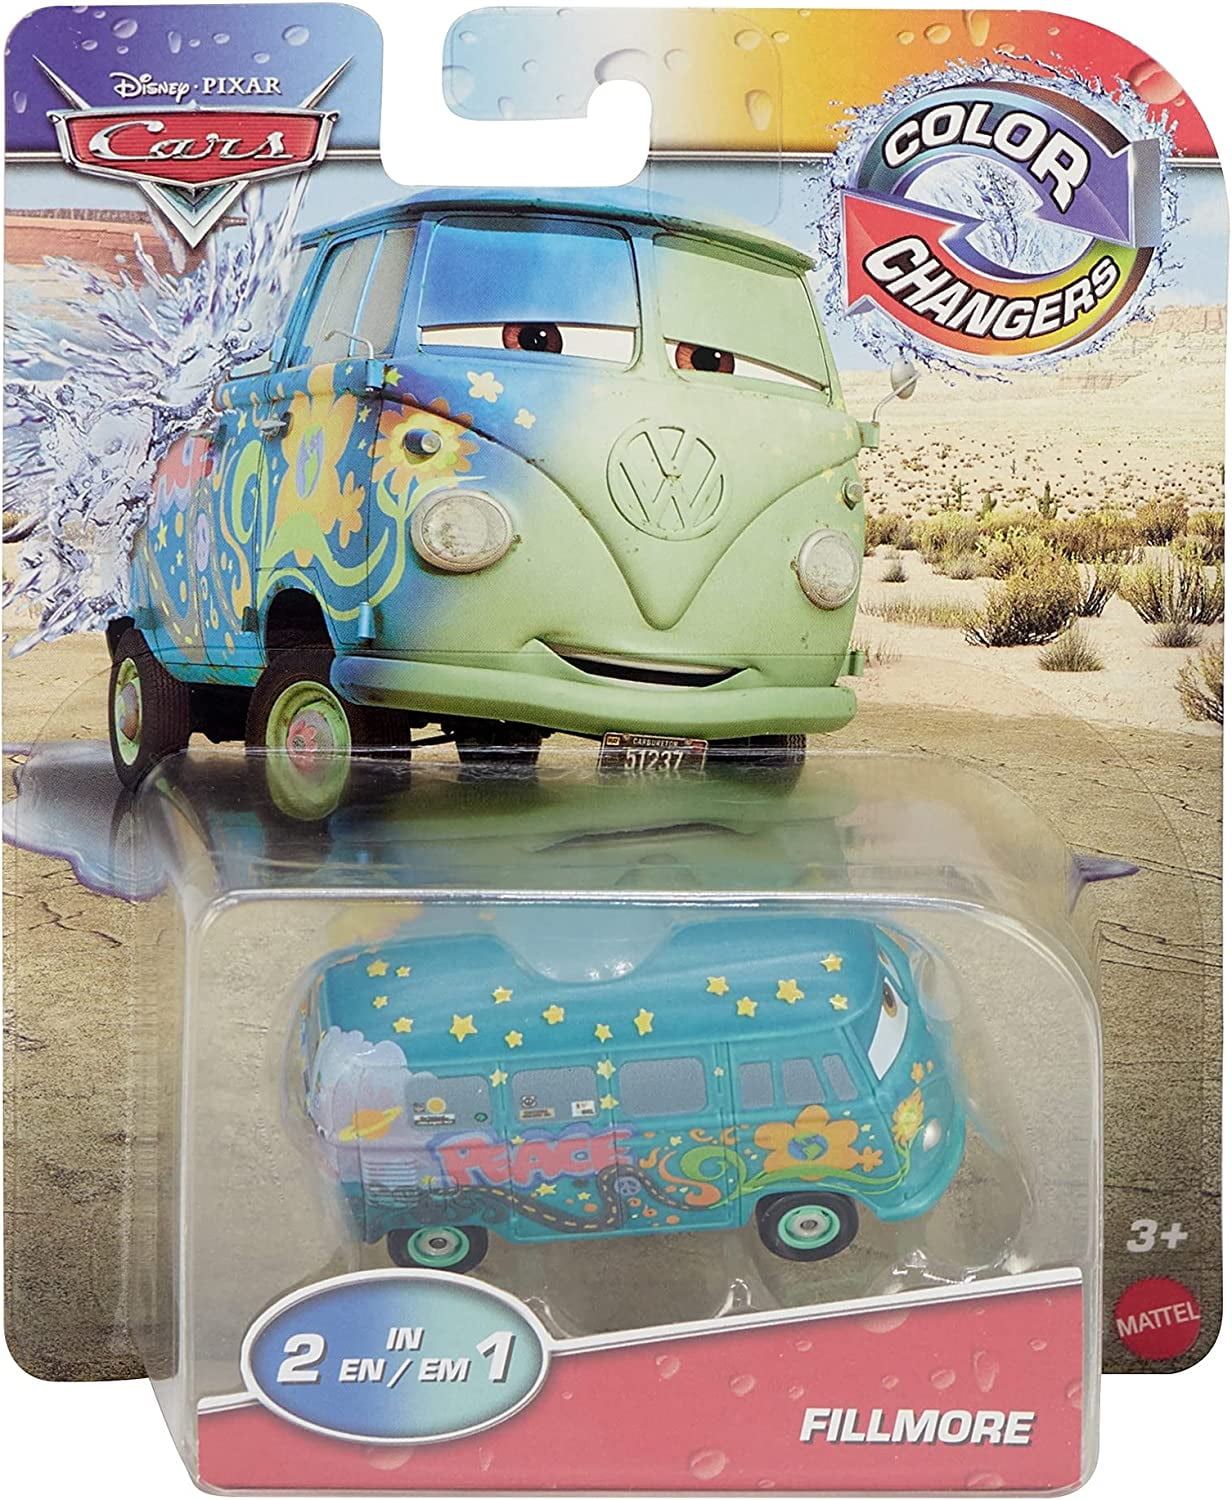 Disney Cars Toys Disney/Pixar Cars, Color Changers, Dinoco Lightning McQueen  (Green to Blue) Vehicle